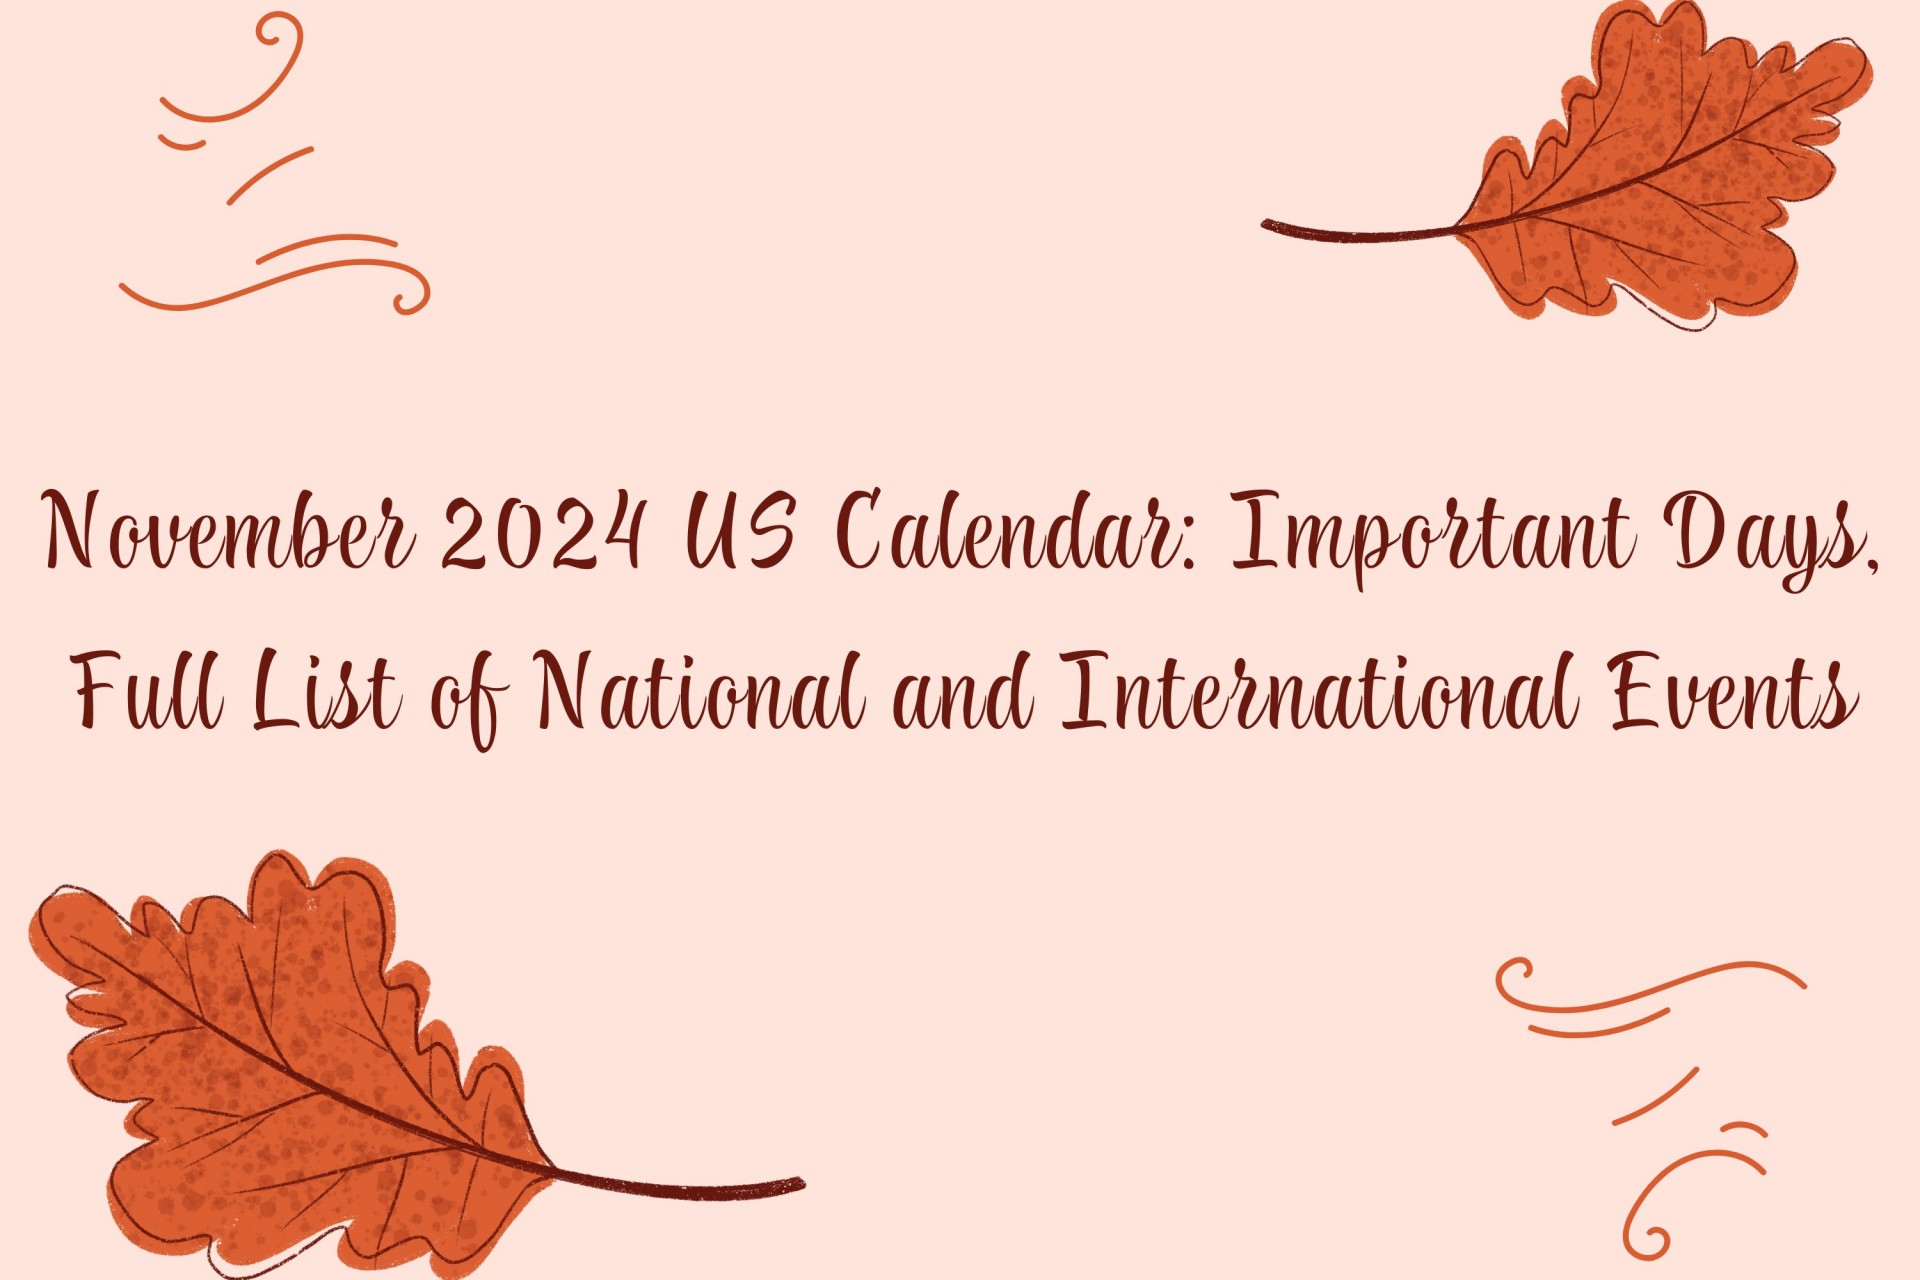 November 2024 US Calendar Special Days, Full List of National and International Events